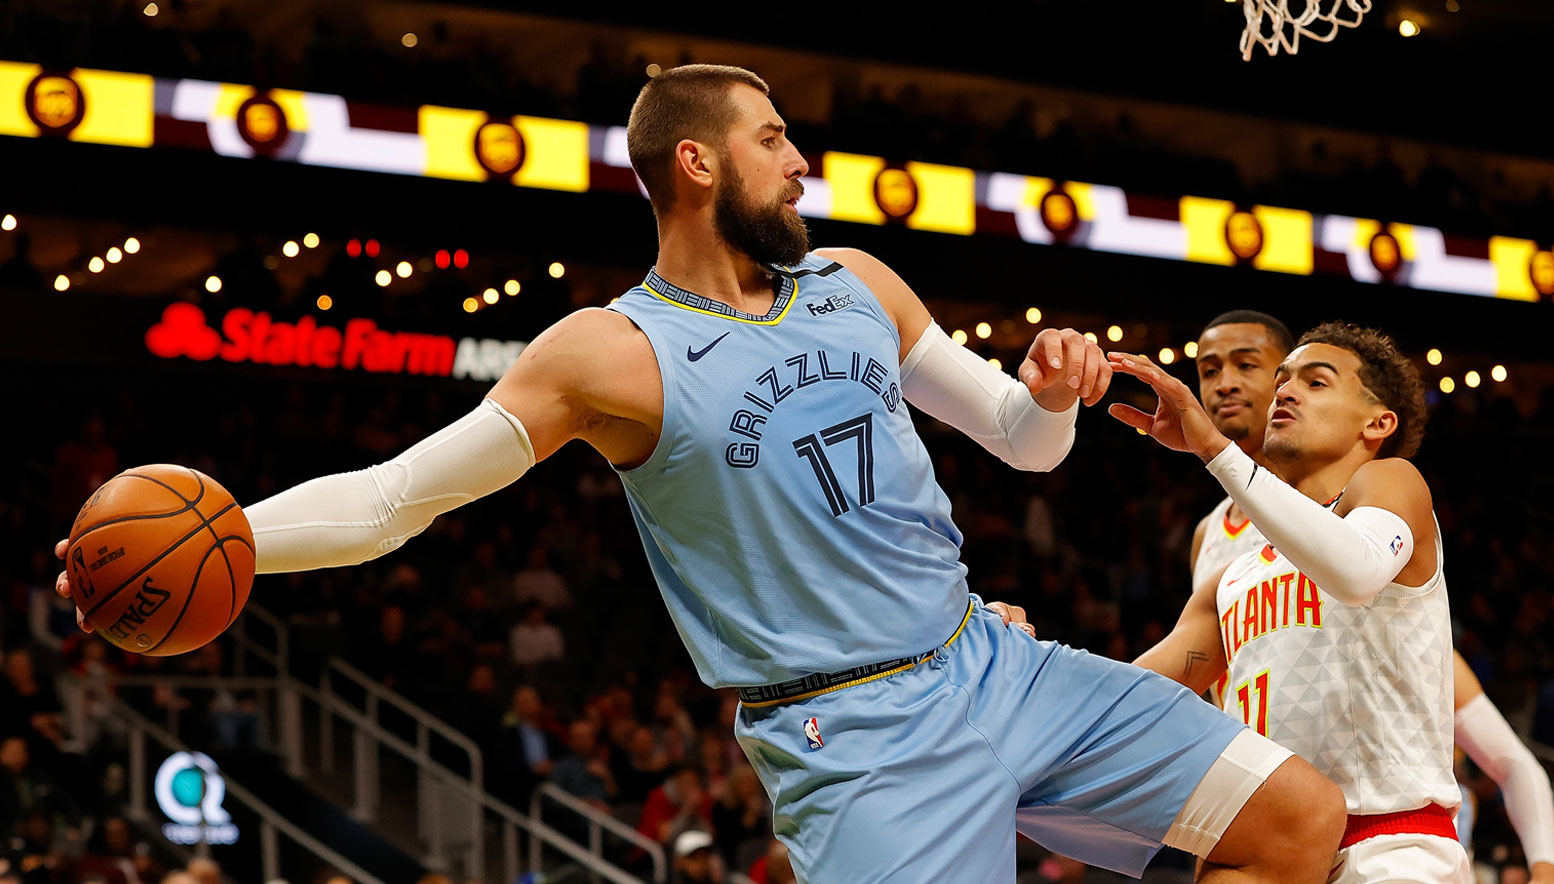 MikeCheck: As chairman of boards, Valanciunas anchors Grizzlies through career’s most prolific stretch